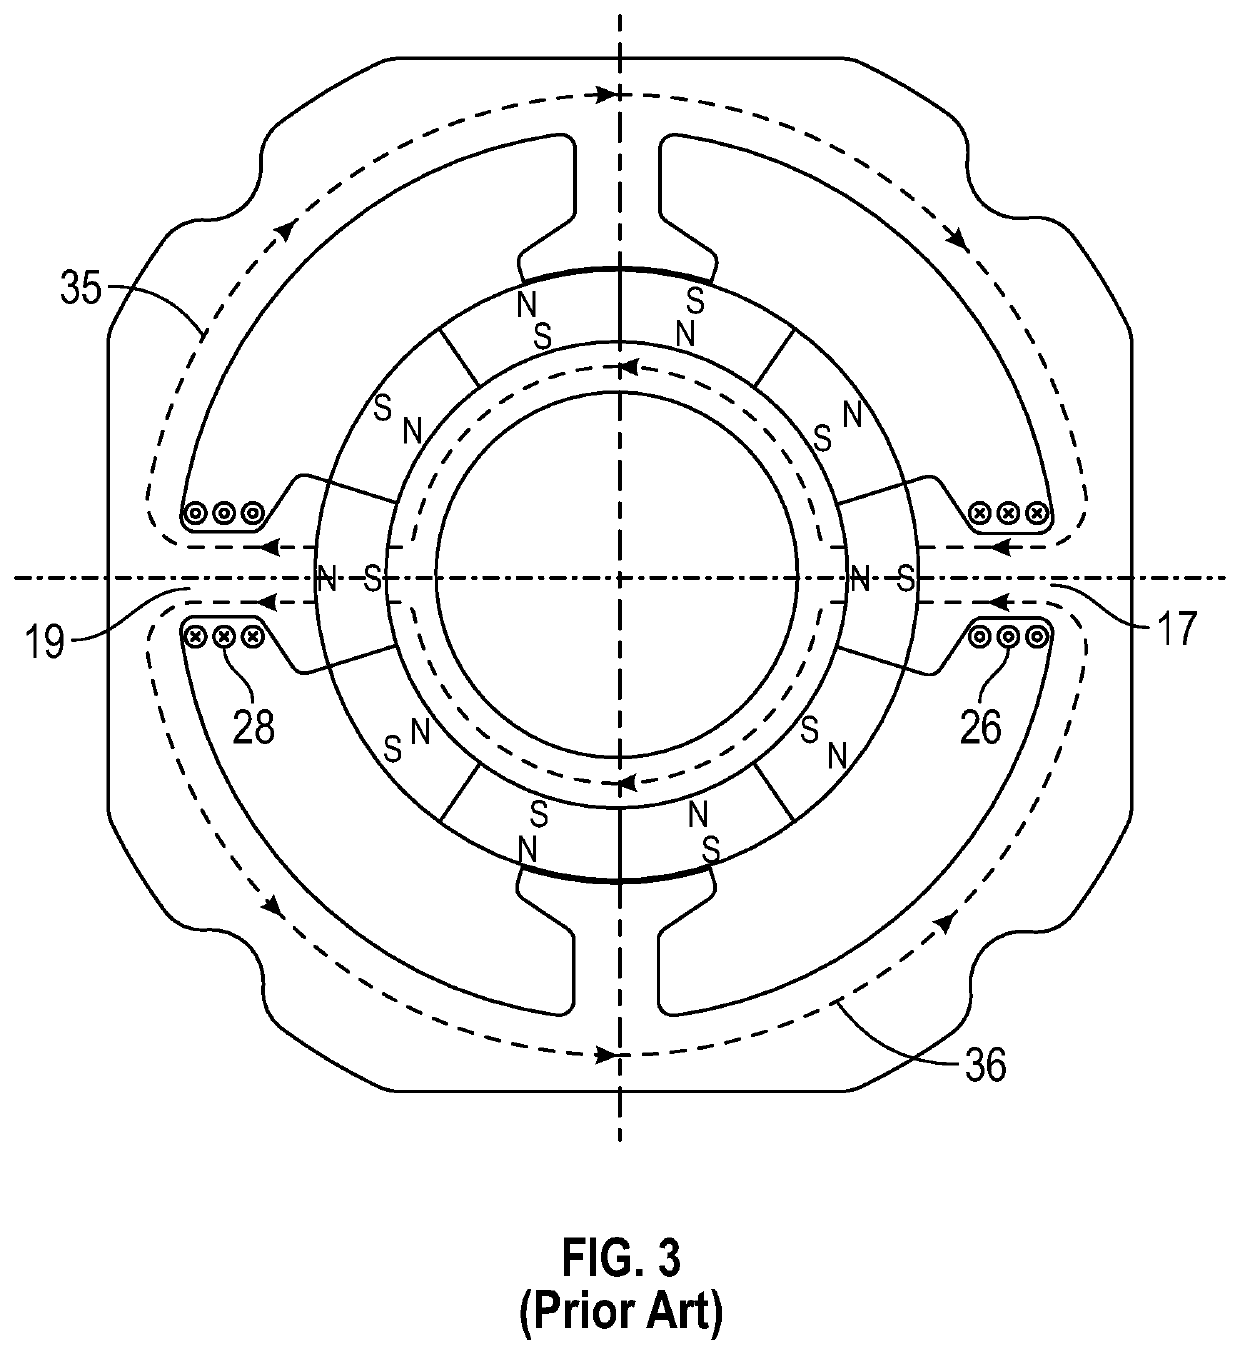 4-stator-pole step motor with passive inter-poles